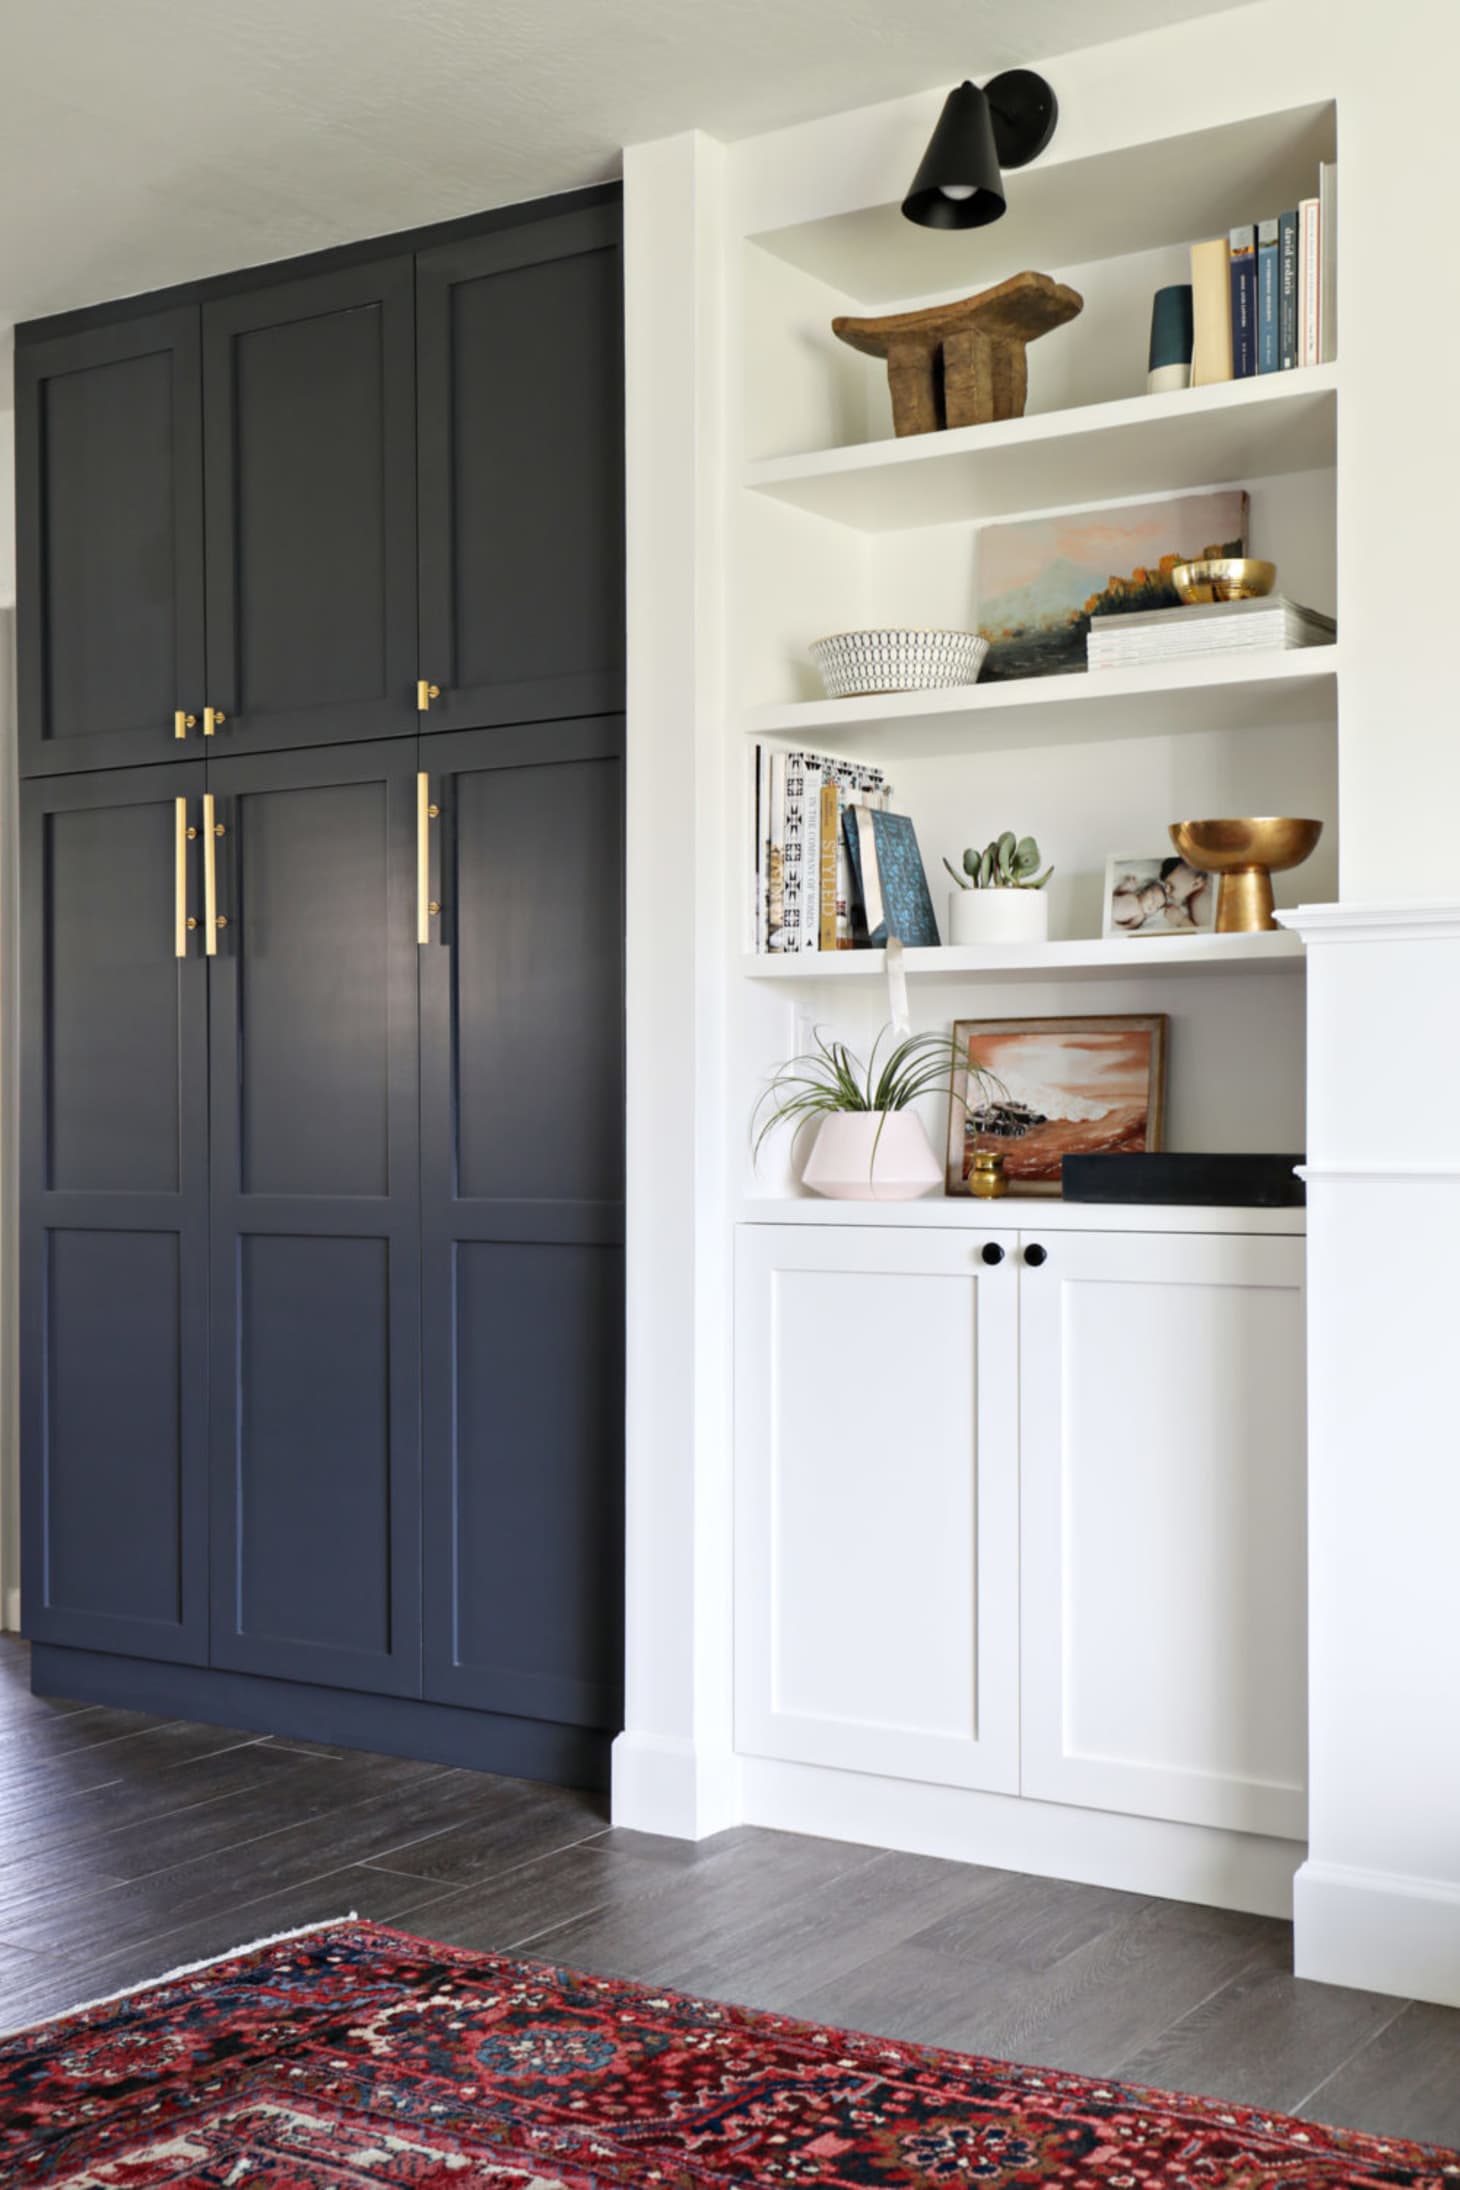 Ikea Pax Wardrobe Hacks That Look Seamless And Built In